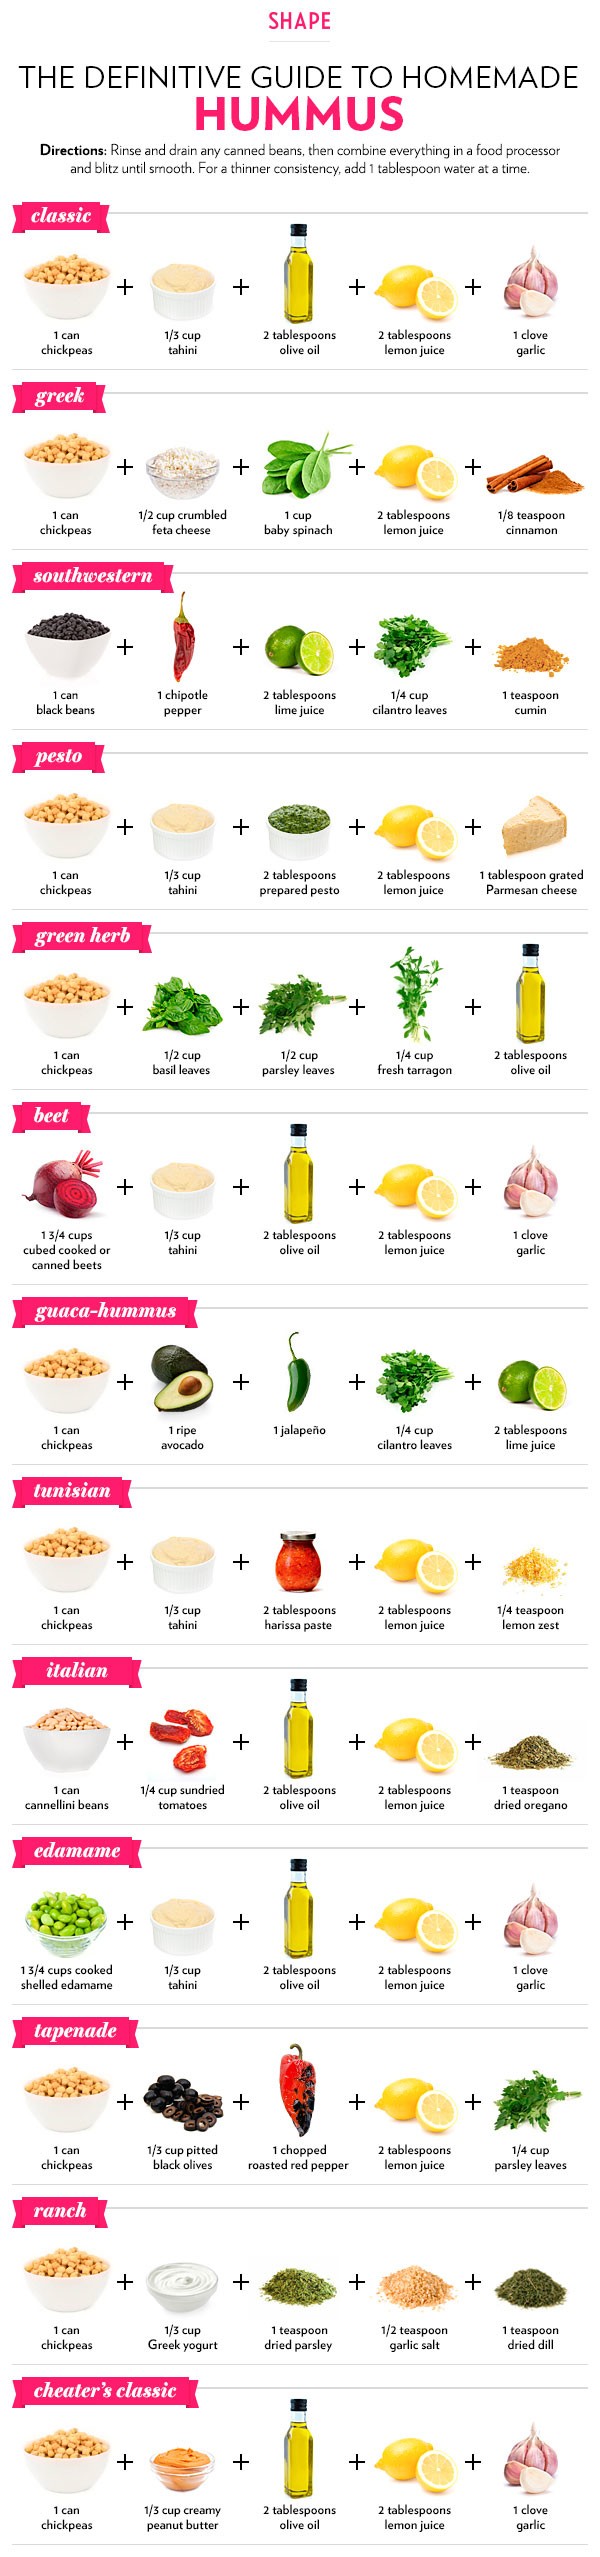 guide to hummus